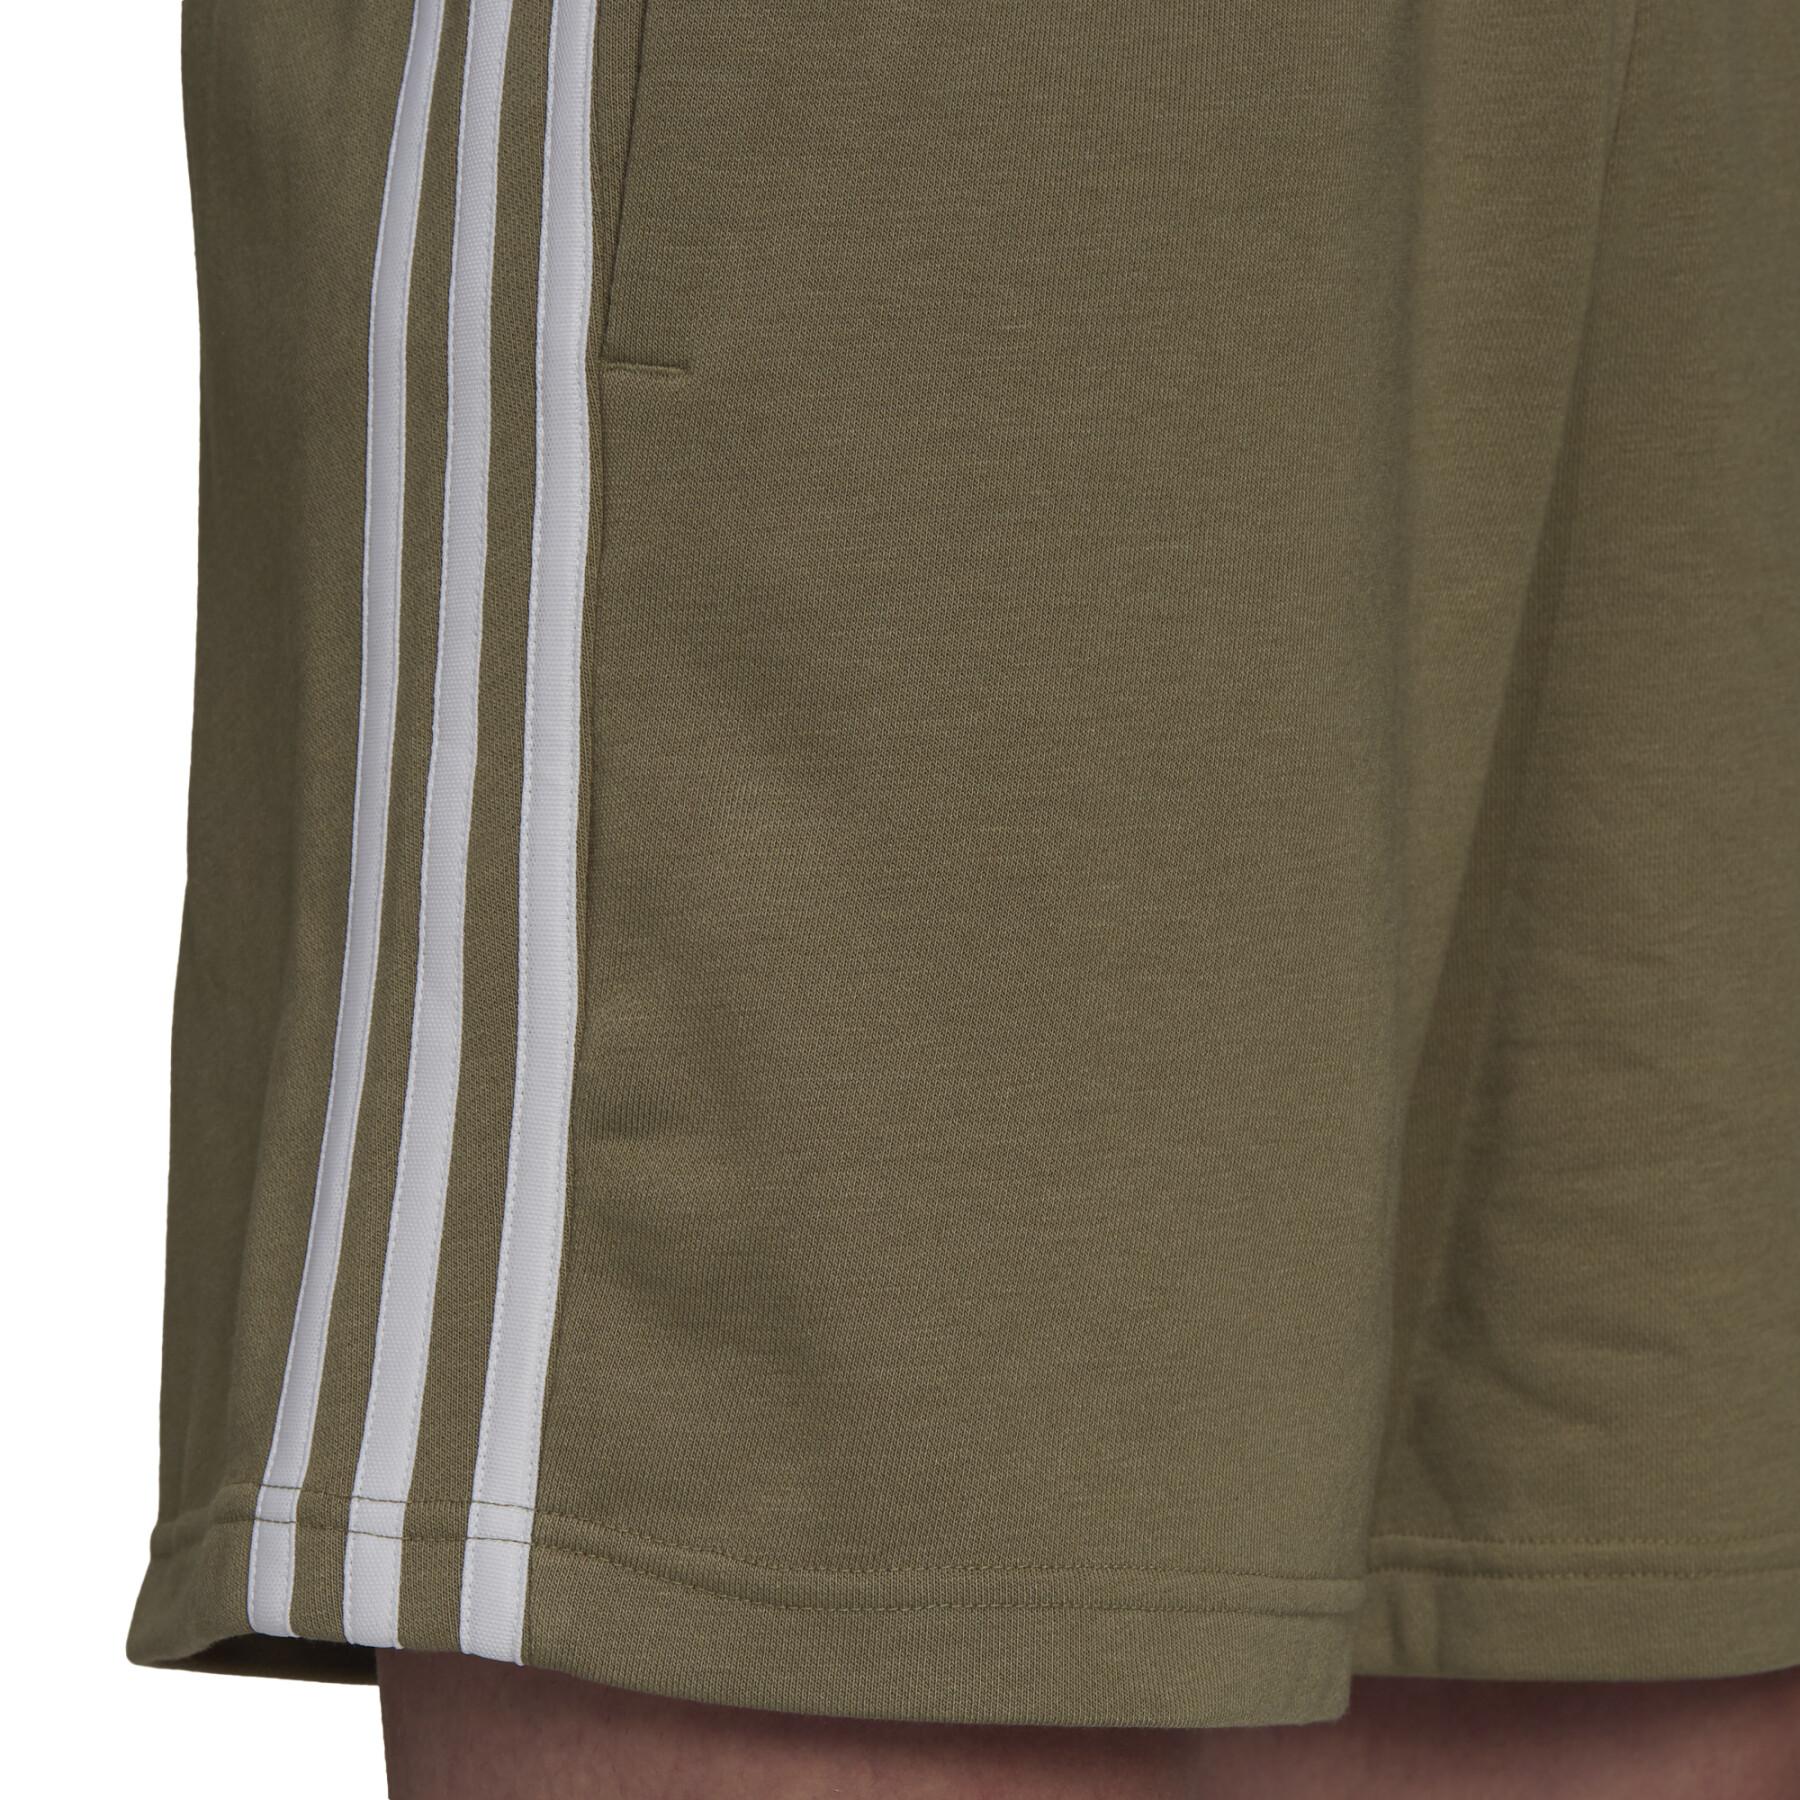 Pantaloncini adidas Essentials French Terry